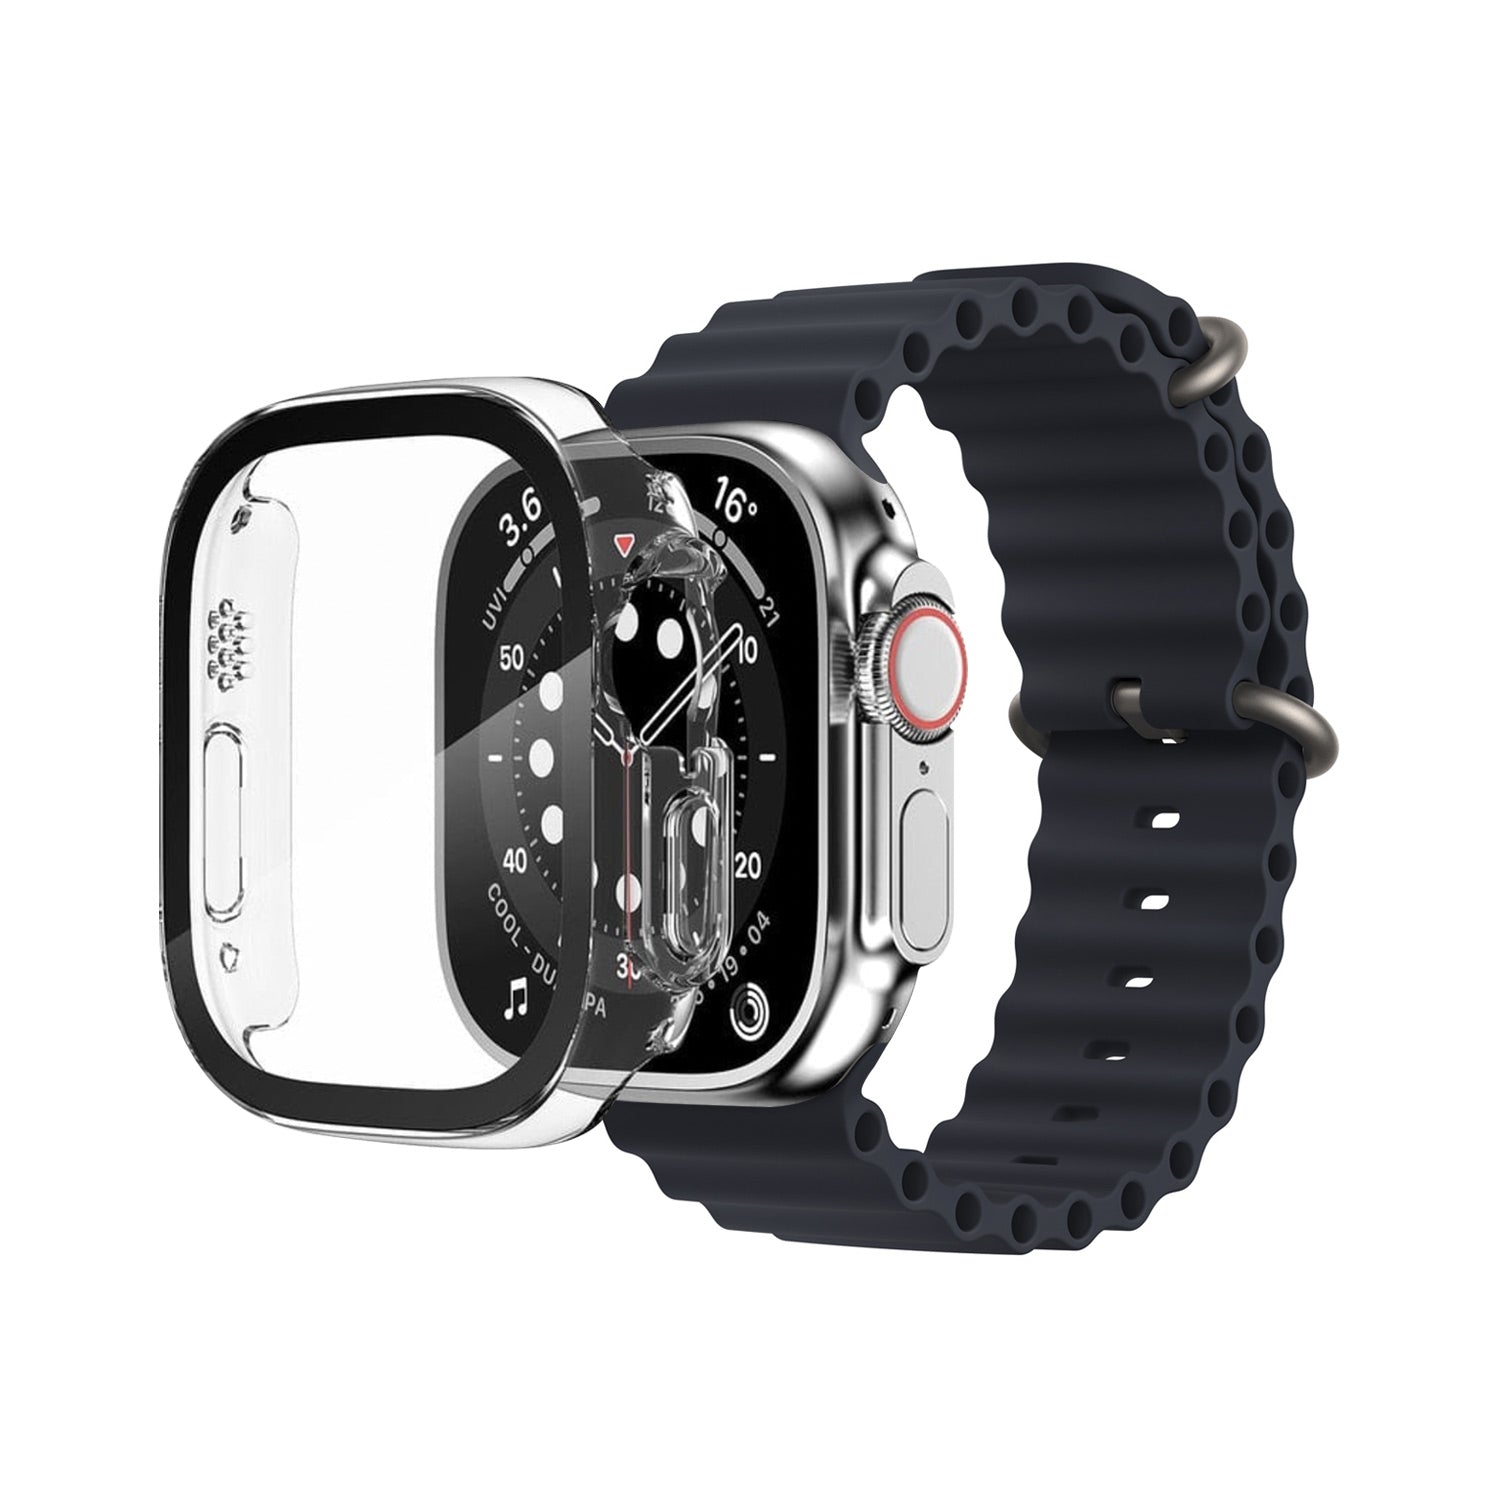 Eiger Mountain Glass Full Case for Apple Watch Ultra 49mm in Clear